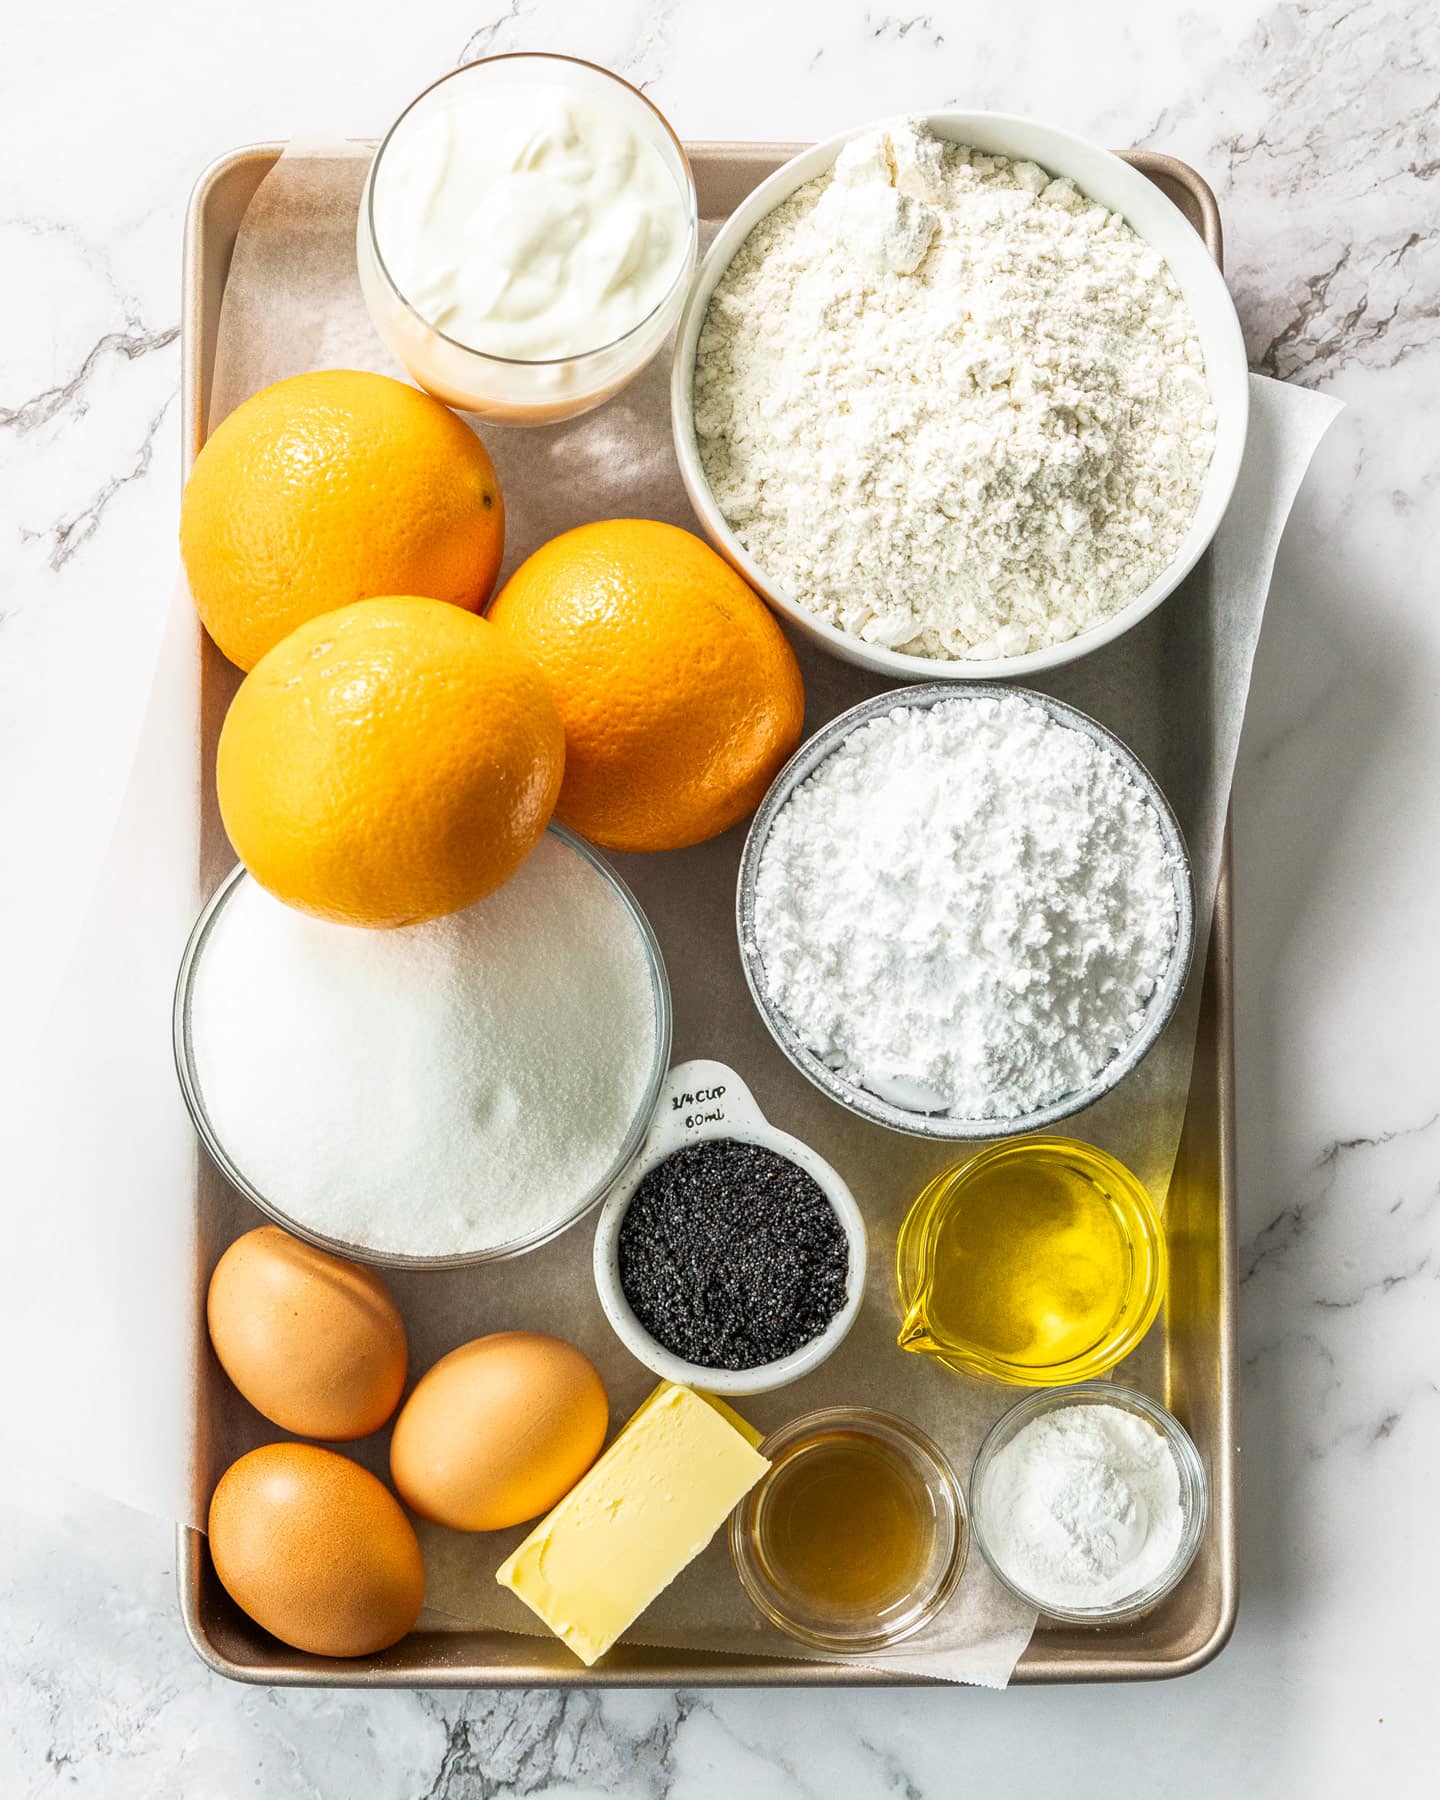 Ingredients for orange and poppy seed cake on a baking tray.